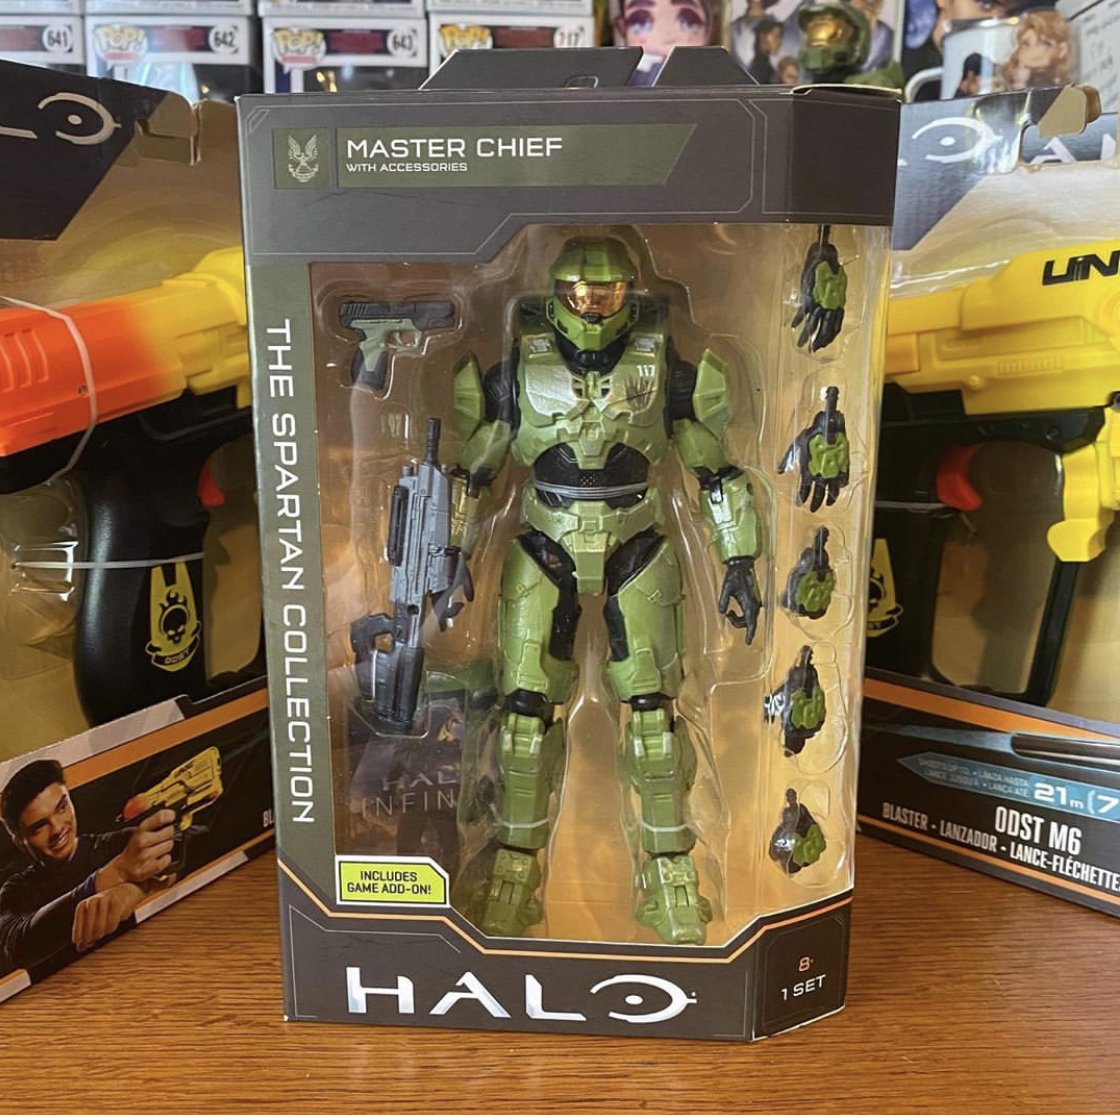 After finalizing our philosophy, approach, and plan for each figure, we finally get things started.Then, after REDACTED, REDACTED, and a little bit of REDACTED, we’re on shelves! (I can only share so much )END OF THREAD ("World of Halo" thread next!) by  @TheLegendary117